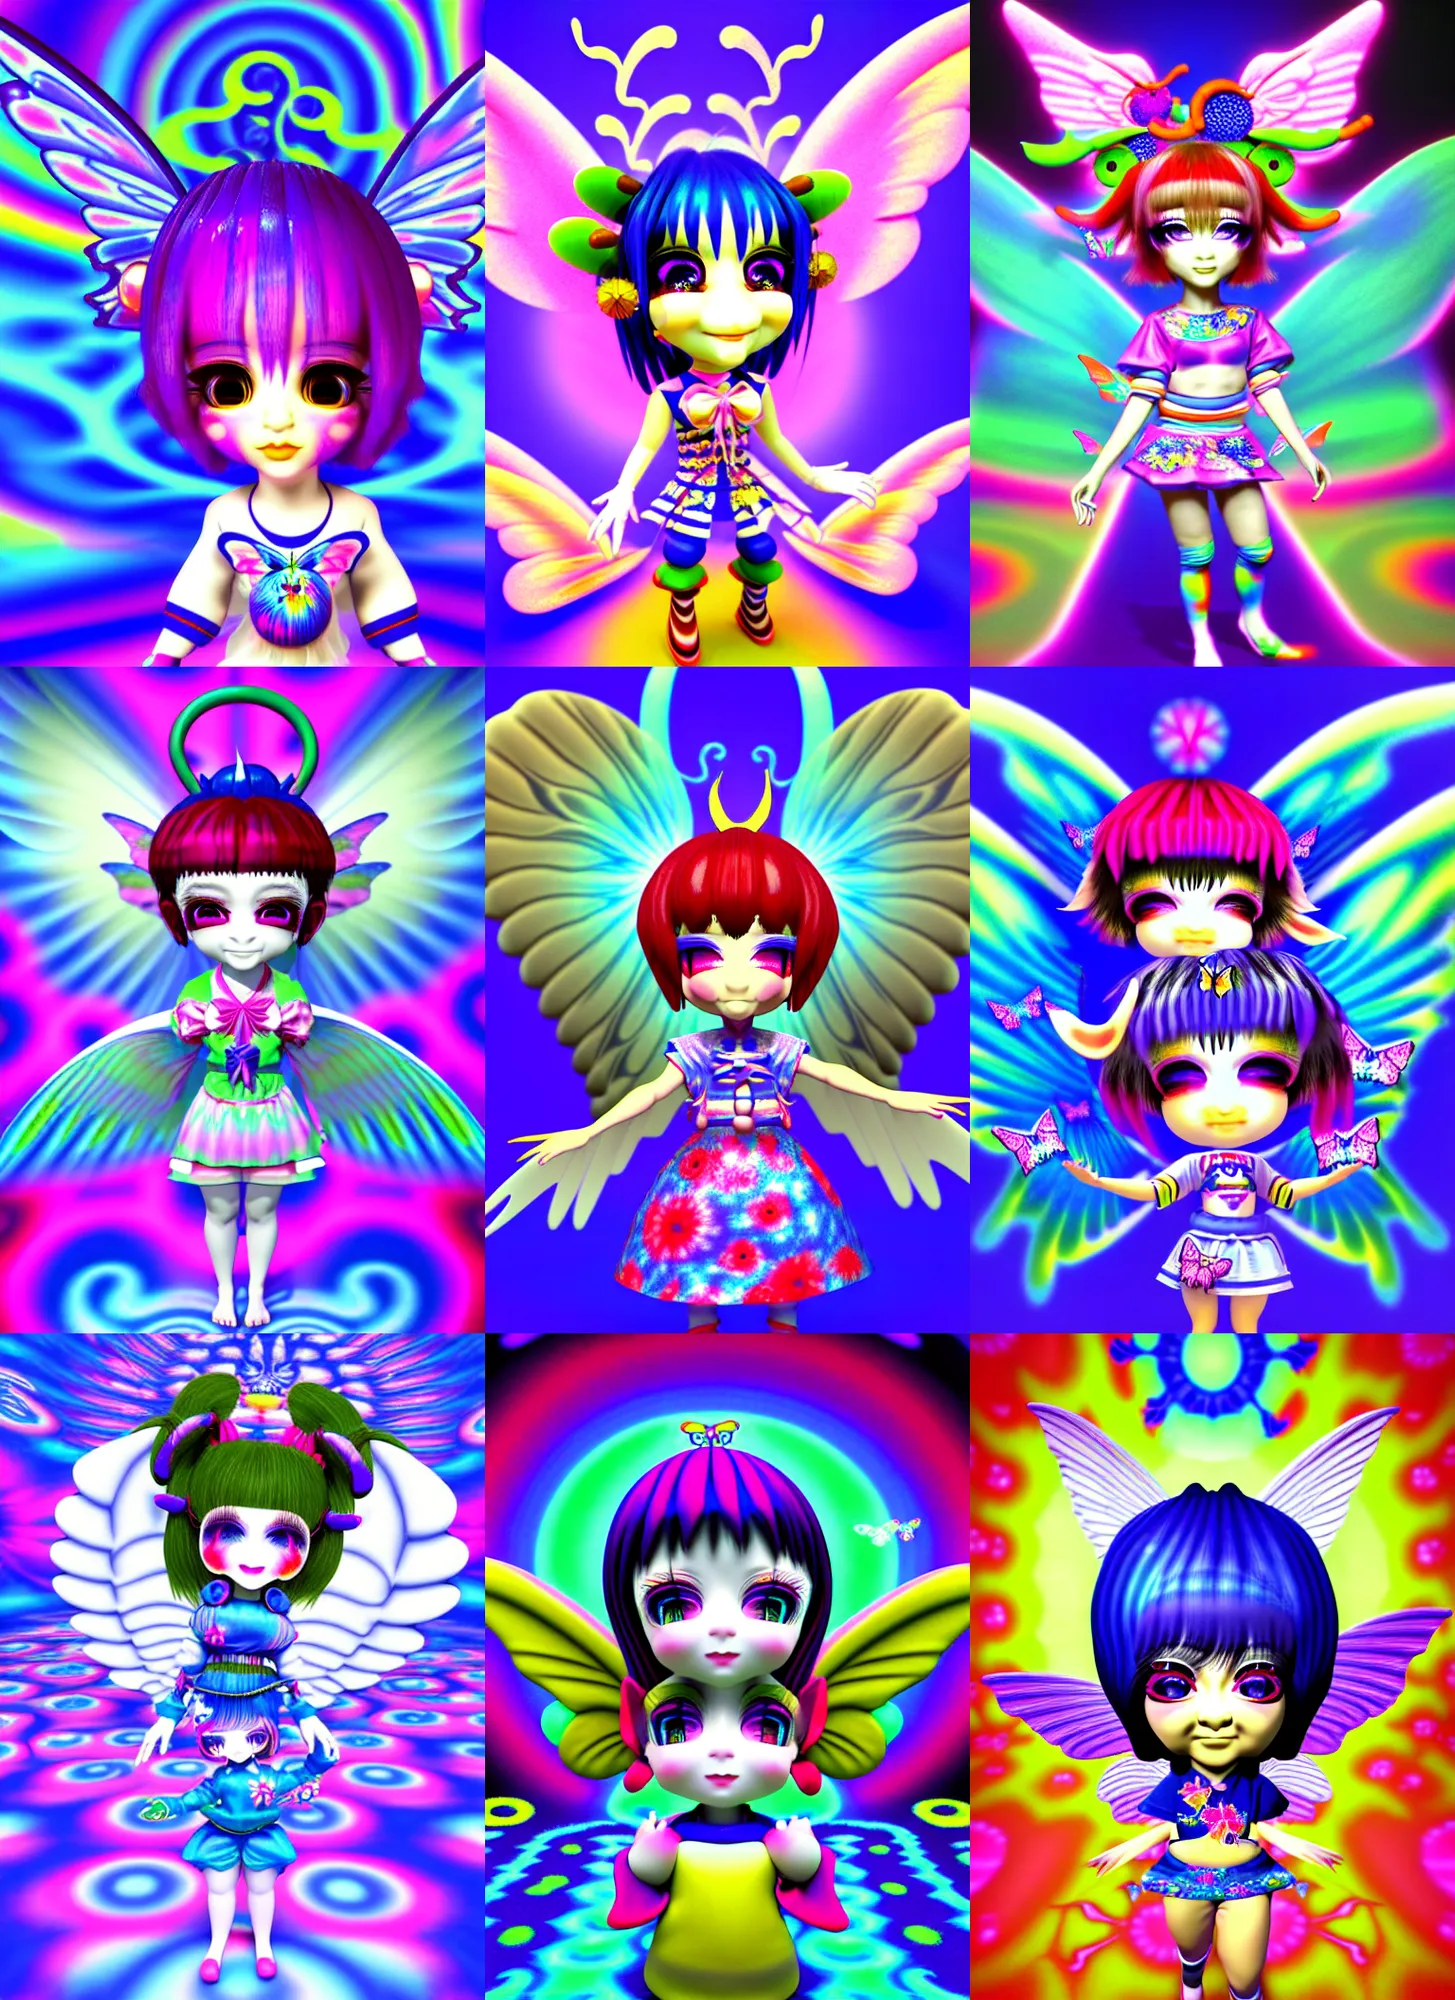 Prompt: 3d render of chibi jester by Ichiro Tanida wearing angel wings against a psychedelic swirly background with 3d butterflies and 3d flowers n the style of 1990's CG graphics 3d rendered y2K aesthetic by Ichiro Tanida, 3DO magazine